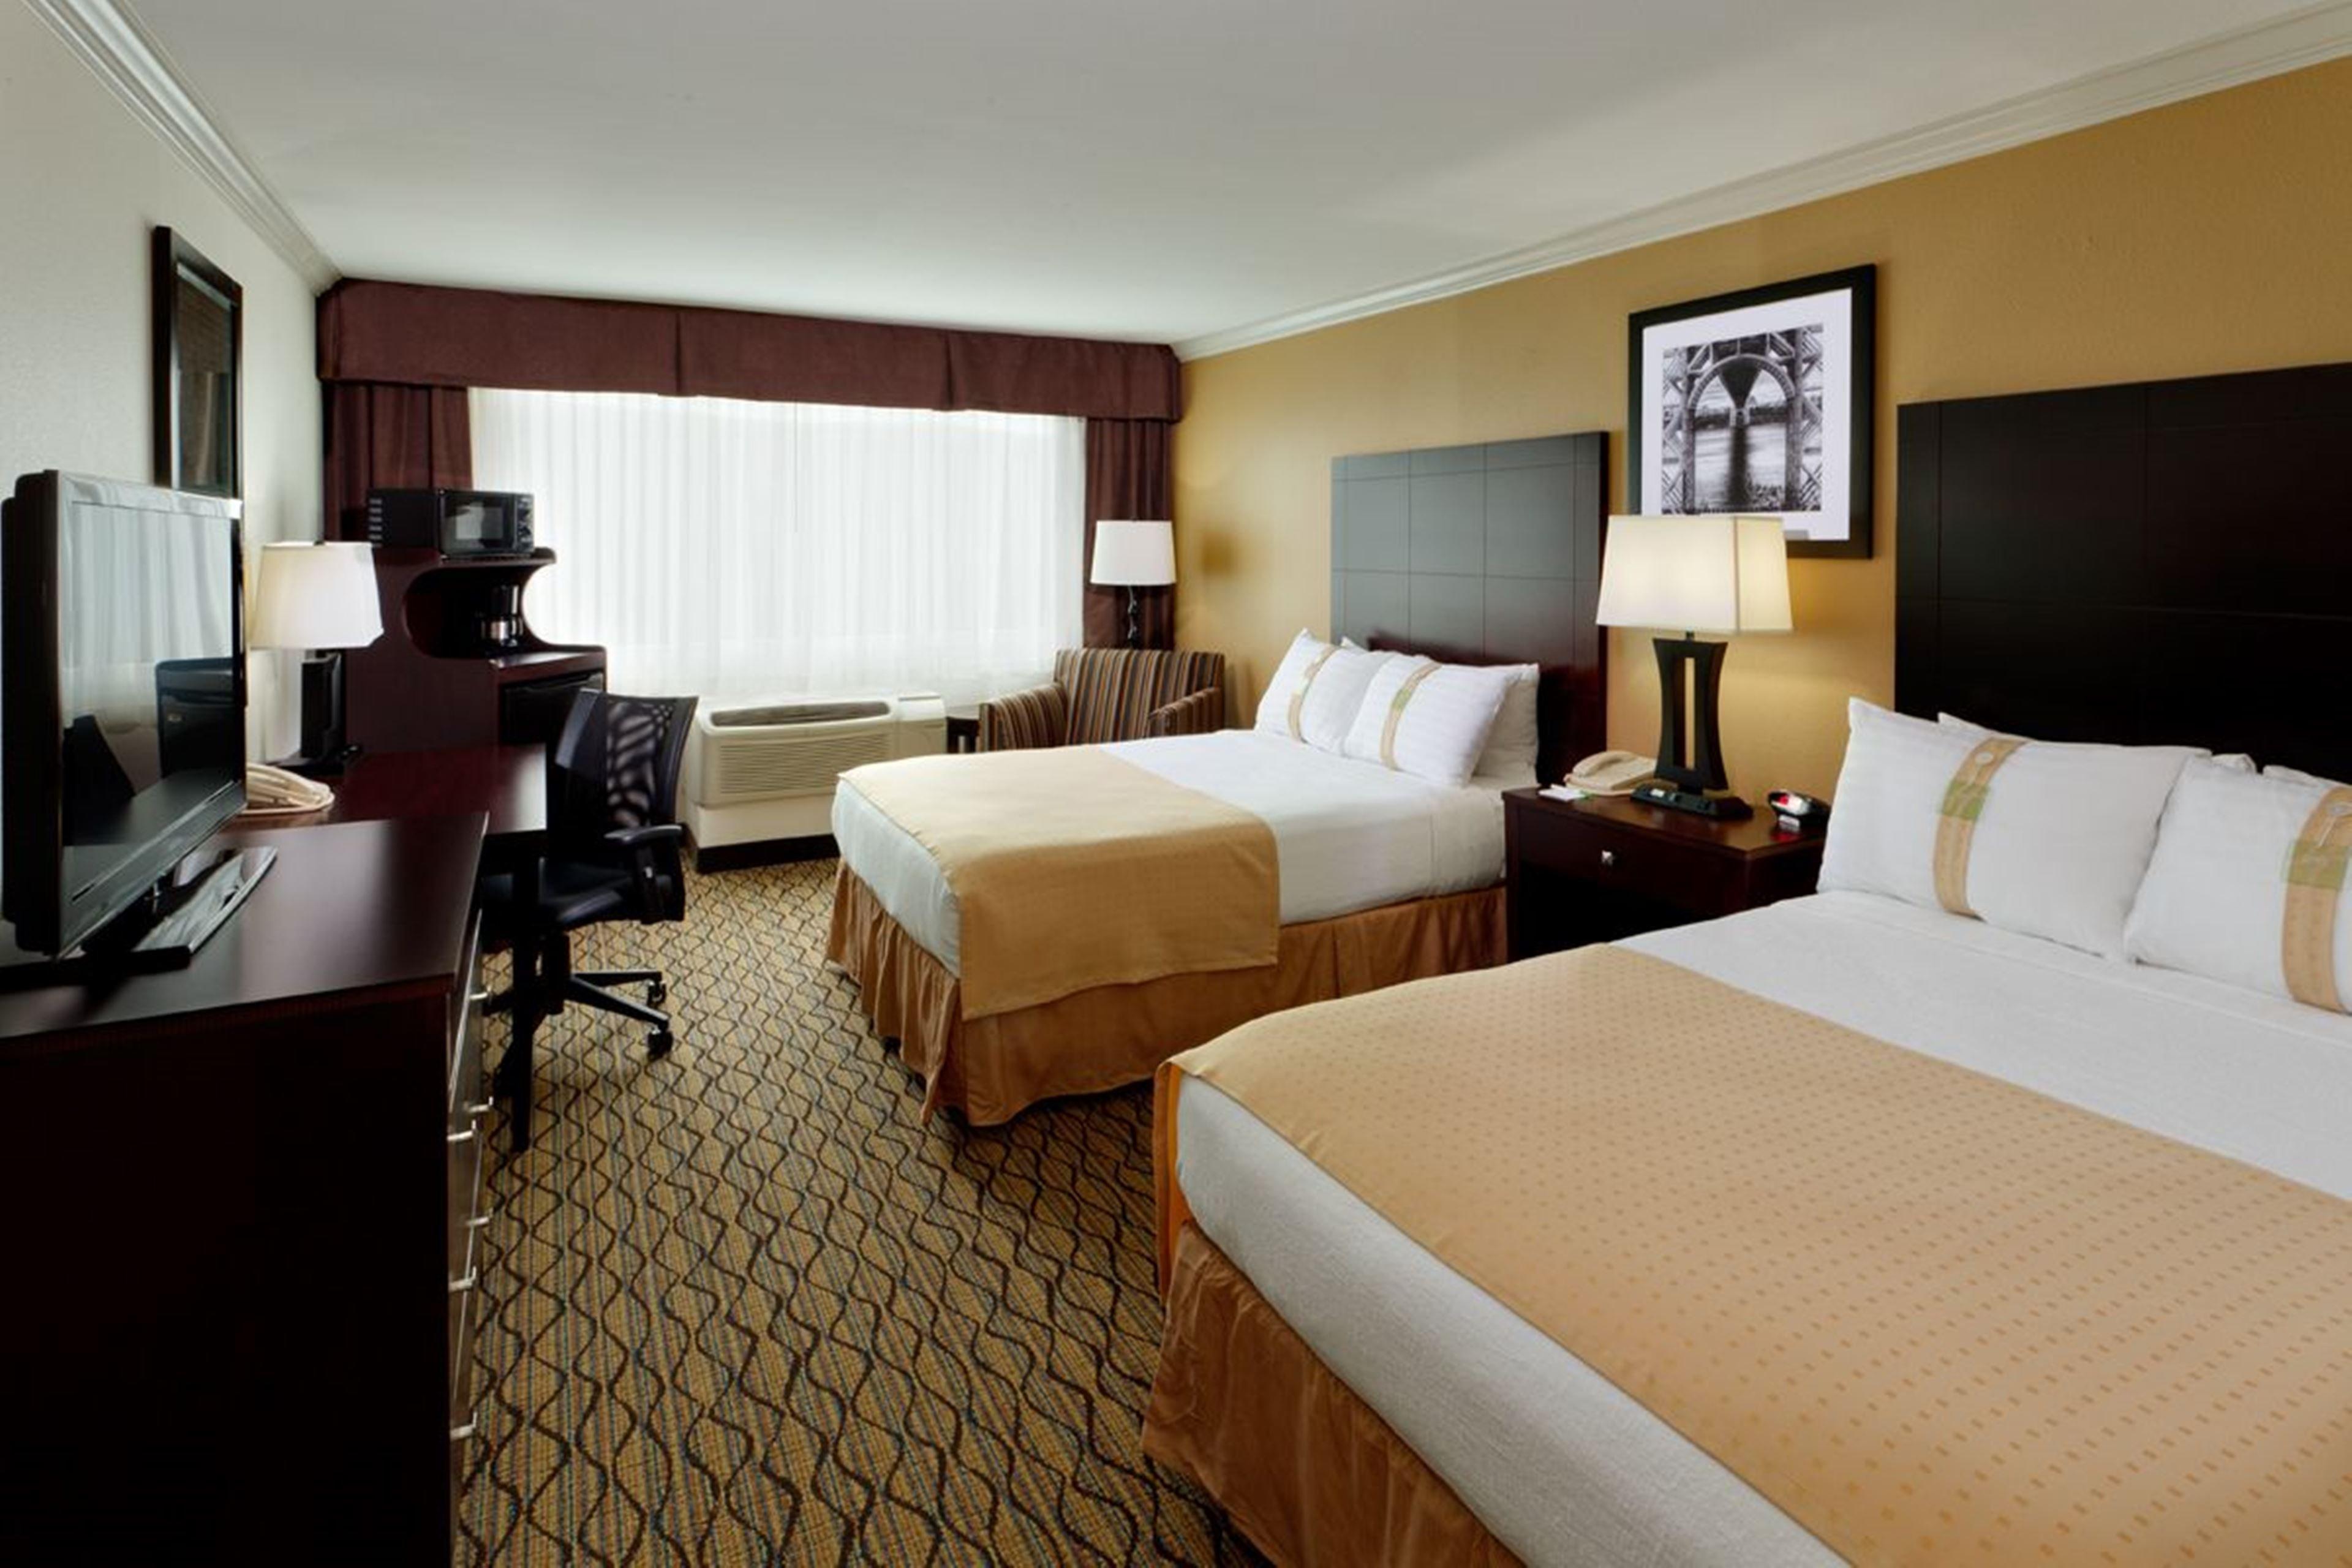 HOLIDAY INN FORT LEE, NJ 3* (United States) - from US$ 164 | BOOKED